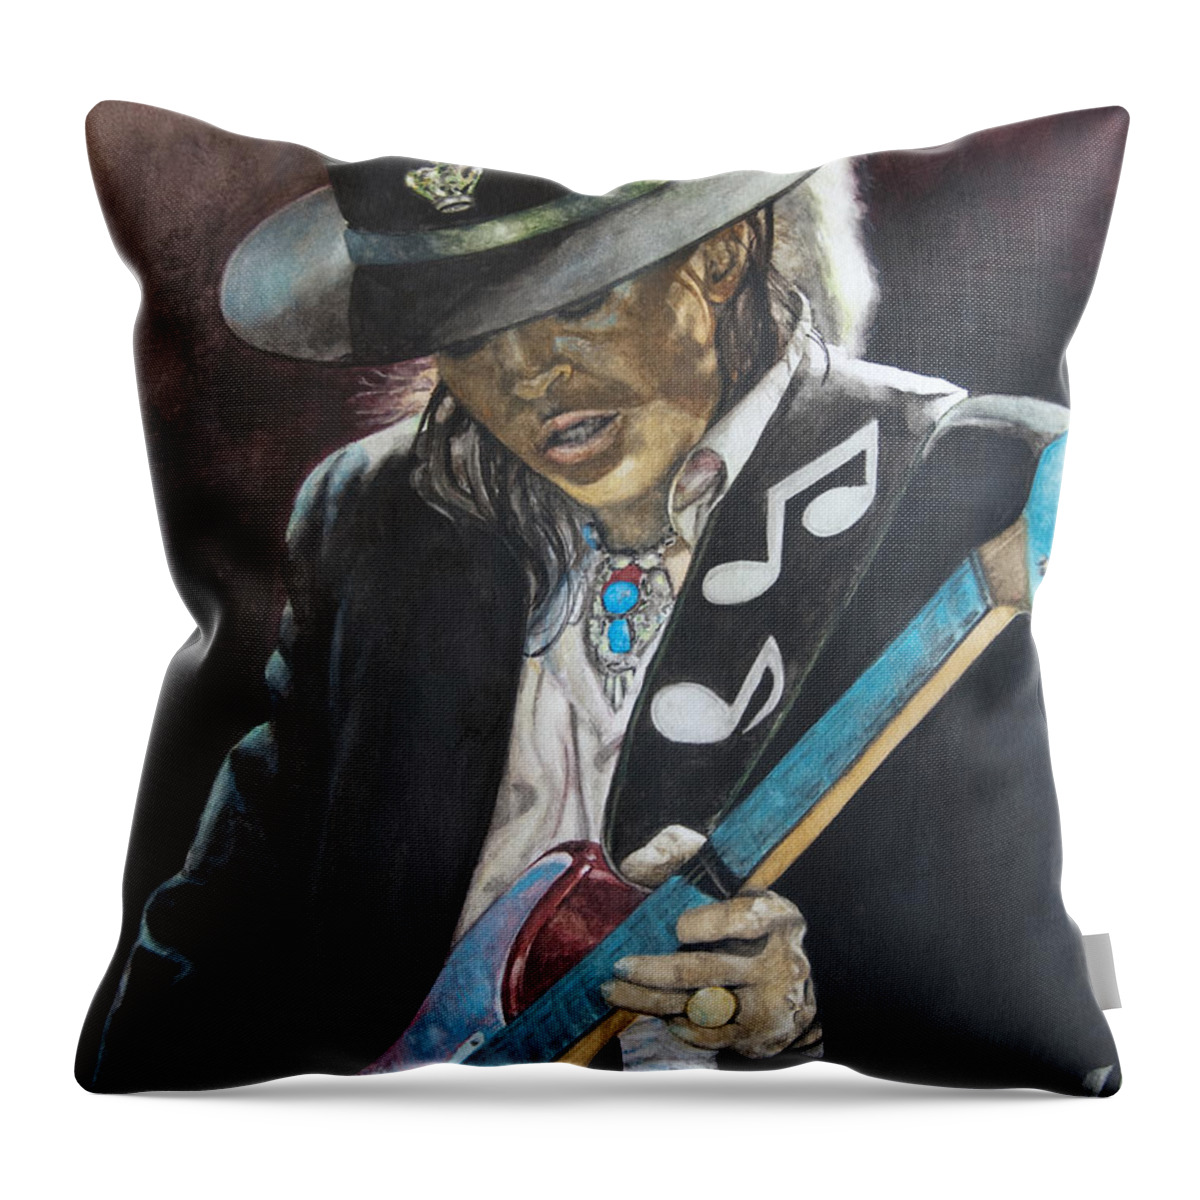 Stevie Ray Vaughan Throw Pillow featuring the painting Stevie Ray Vaughan by Lance Gebhardt